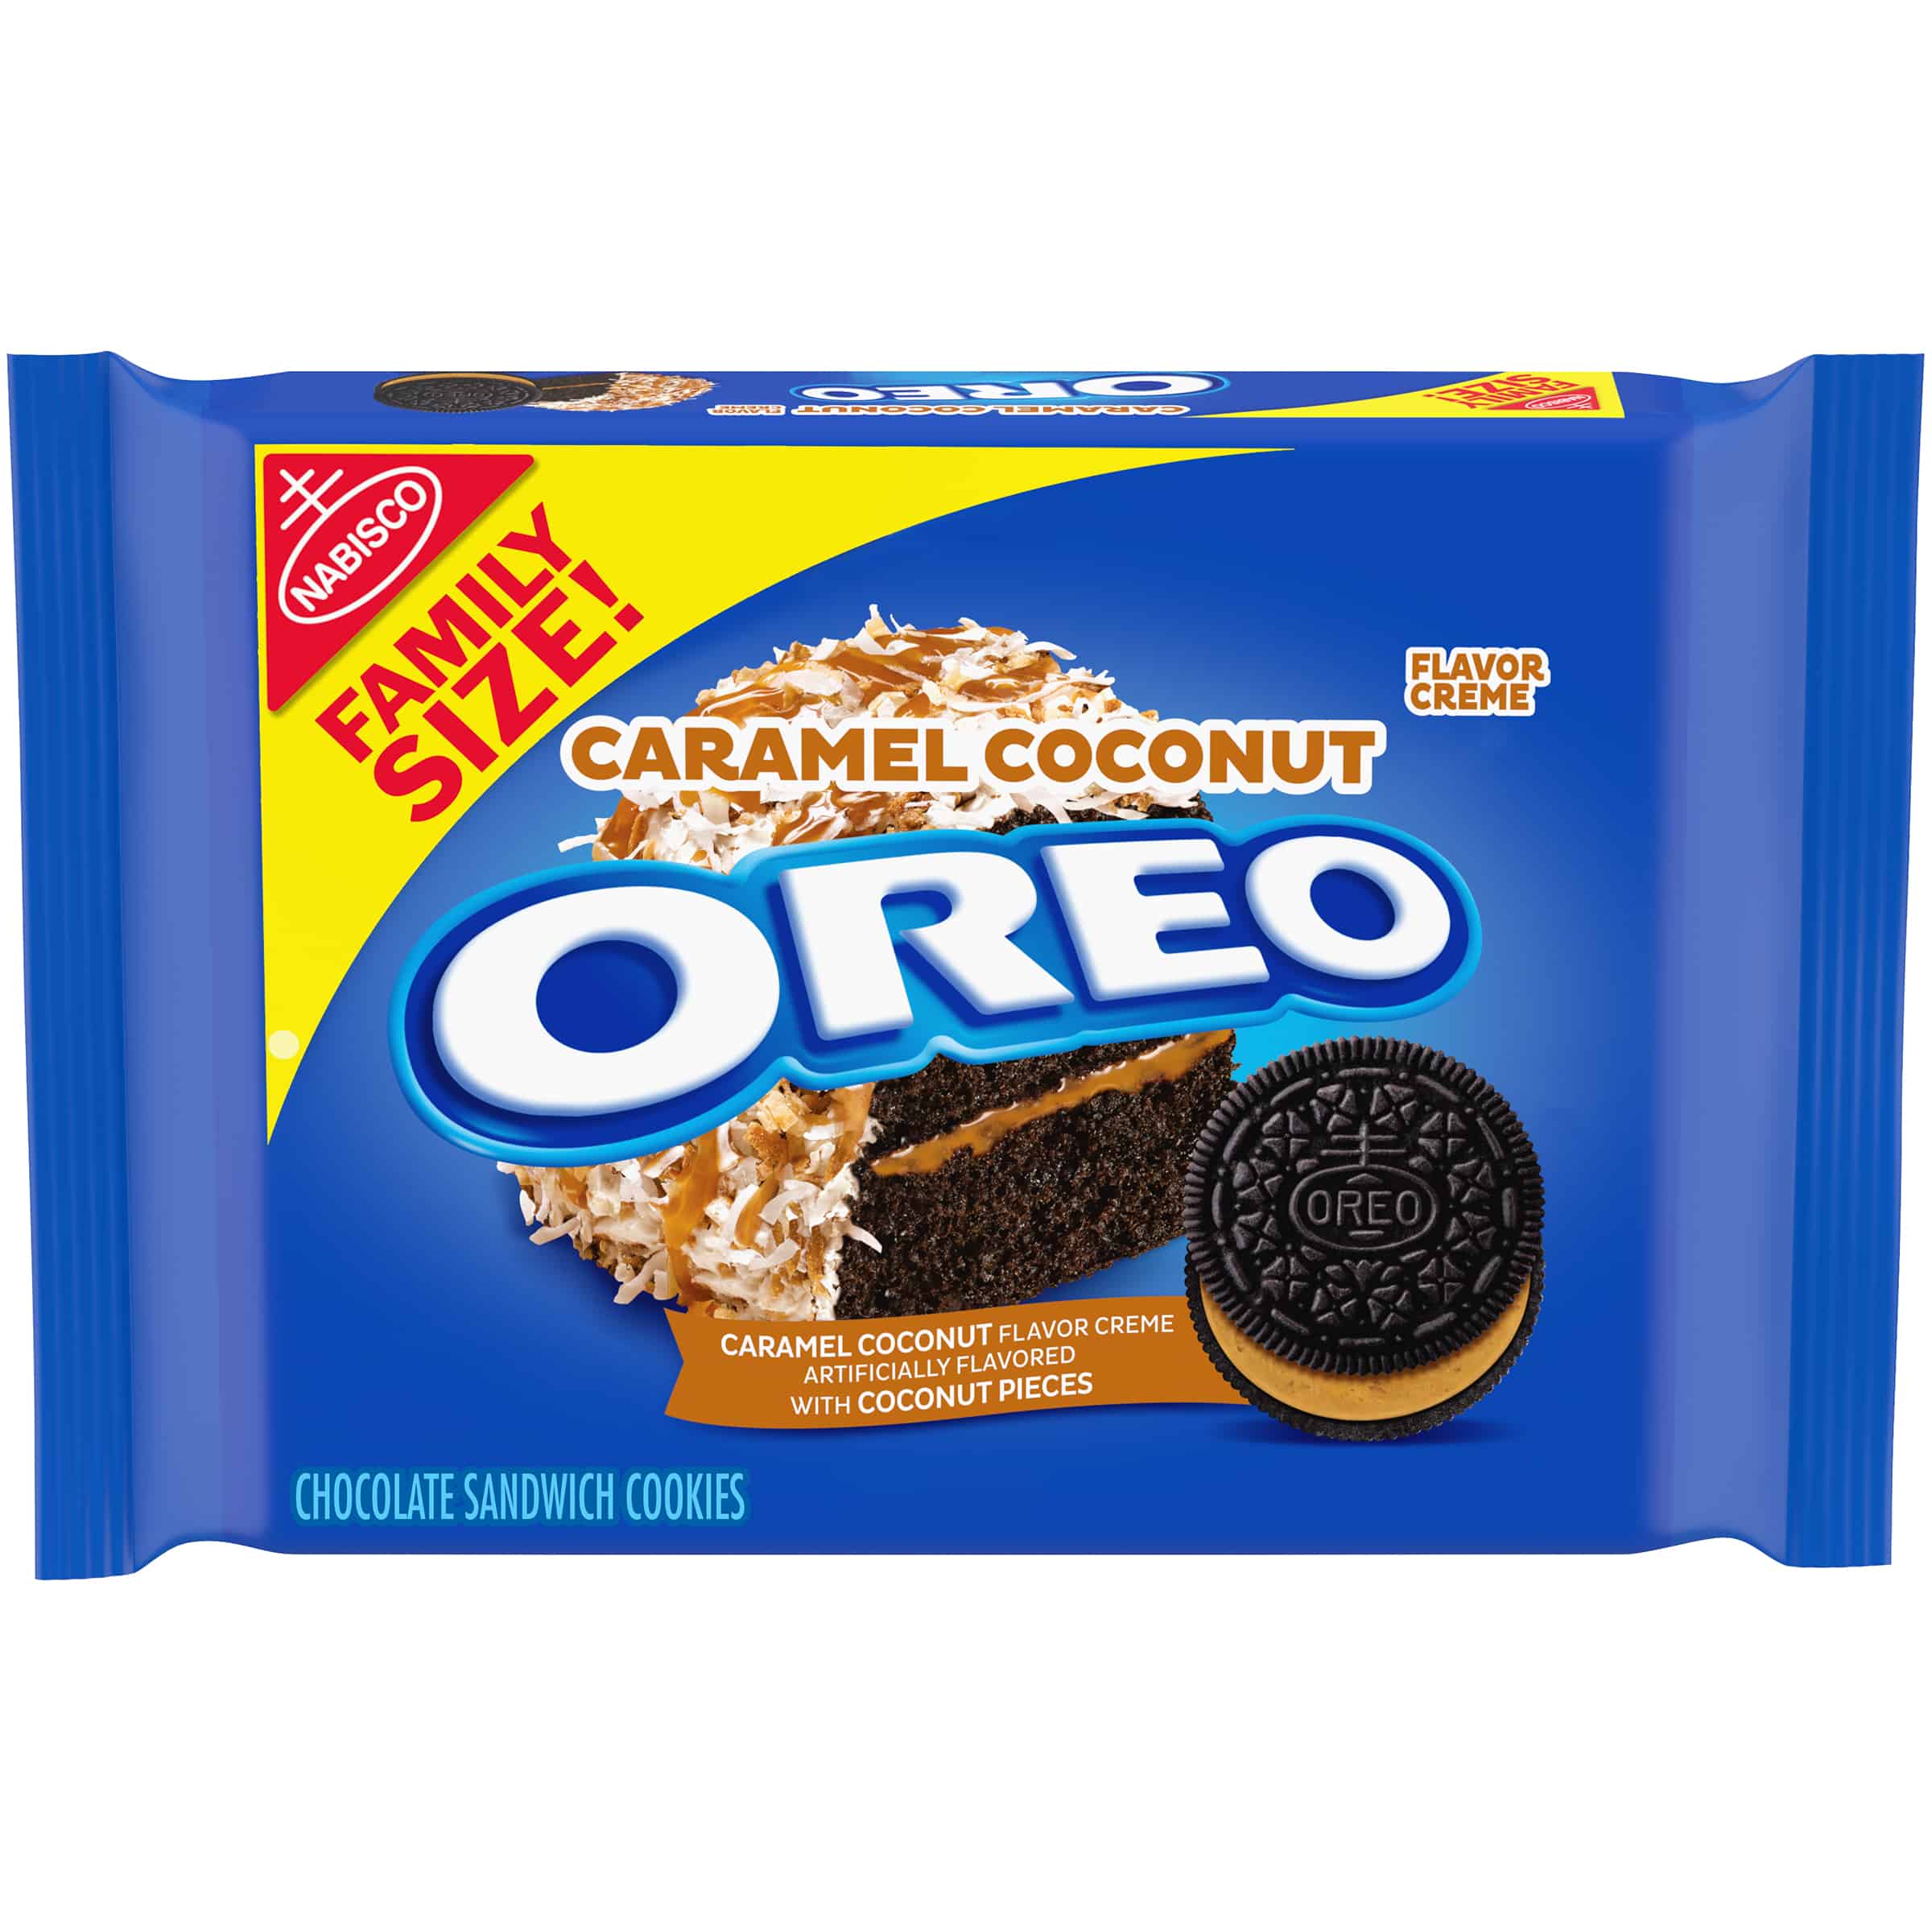 OREO, Caramel Coconut Flavored Creme, 1 Family Size Pack (17 oz.)